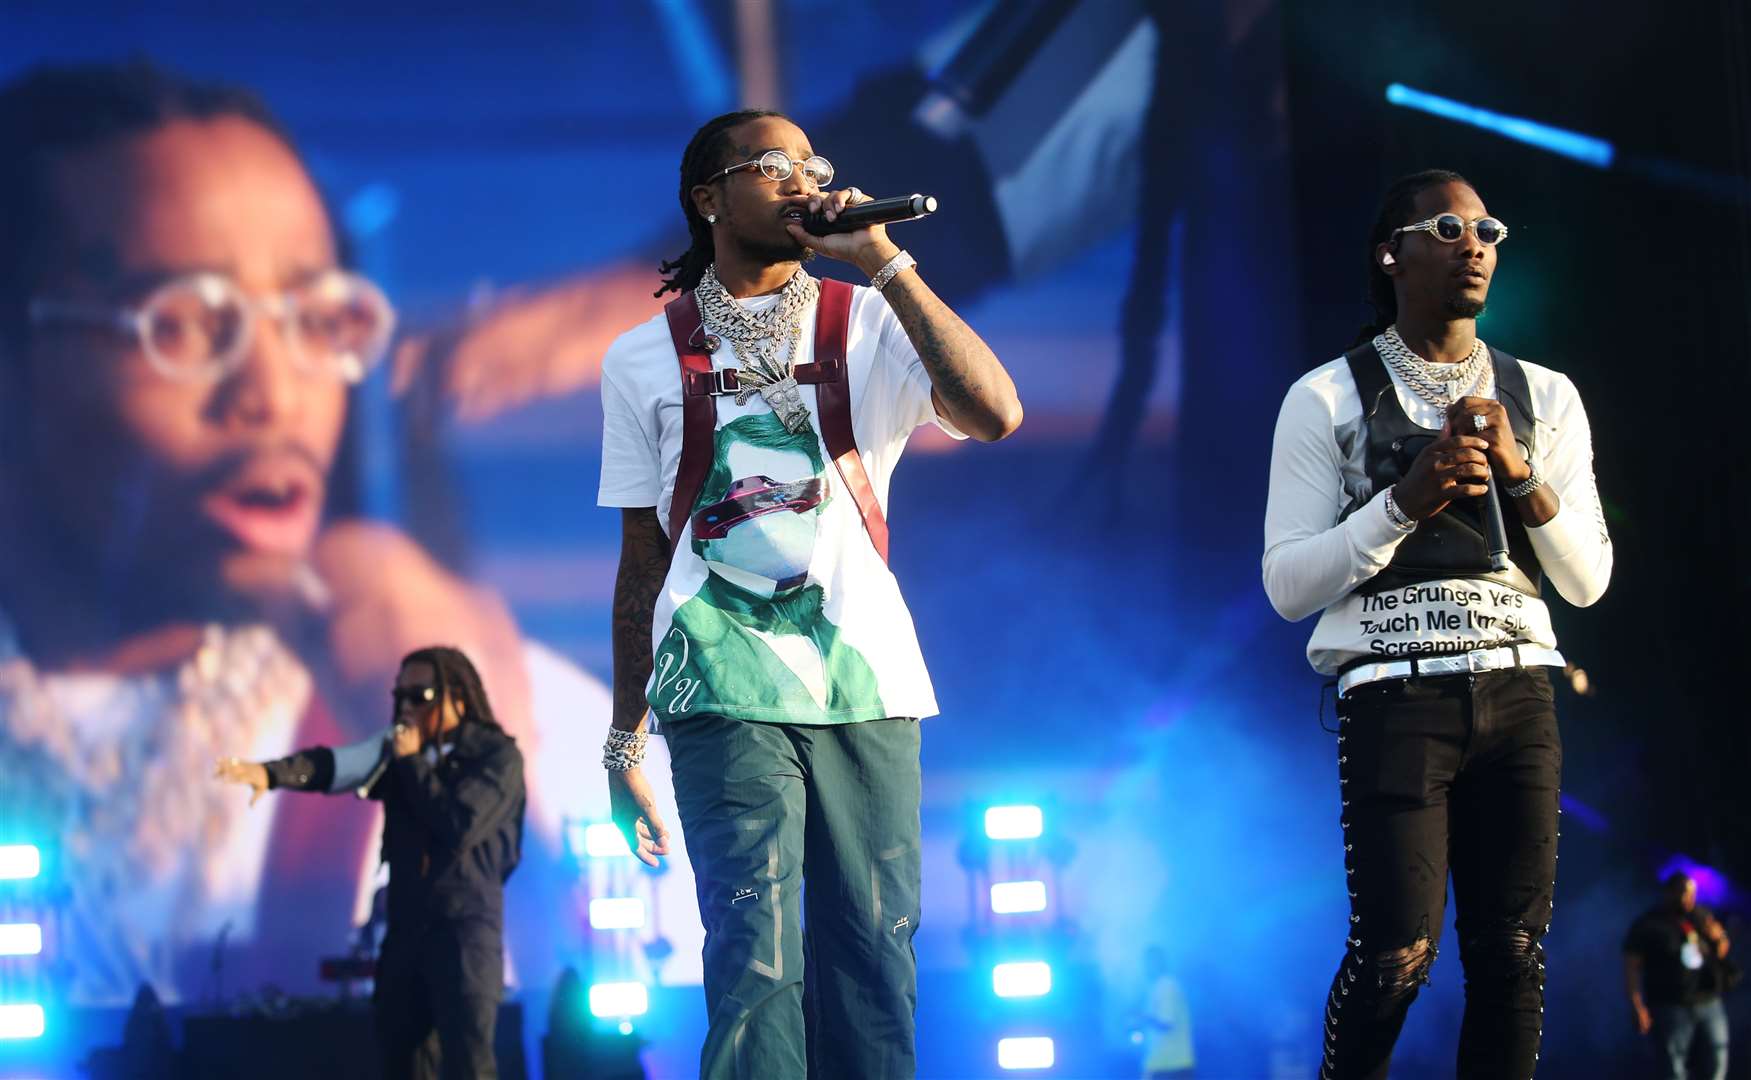 Takeoff, Quavo, and Offset perform at Wireless Festival held at Finsbury Park, London (Isabel Infantes/PA)